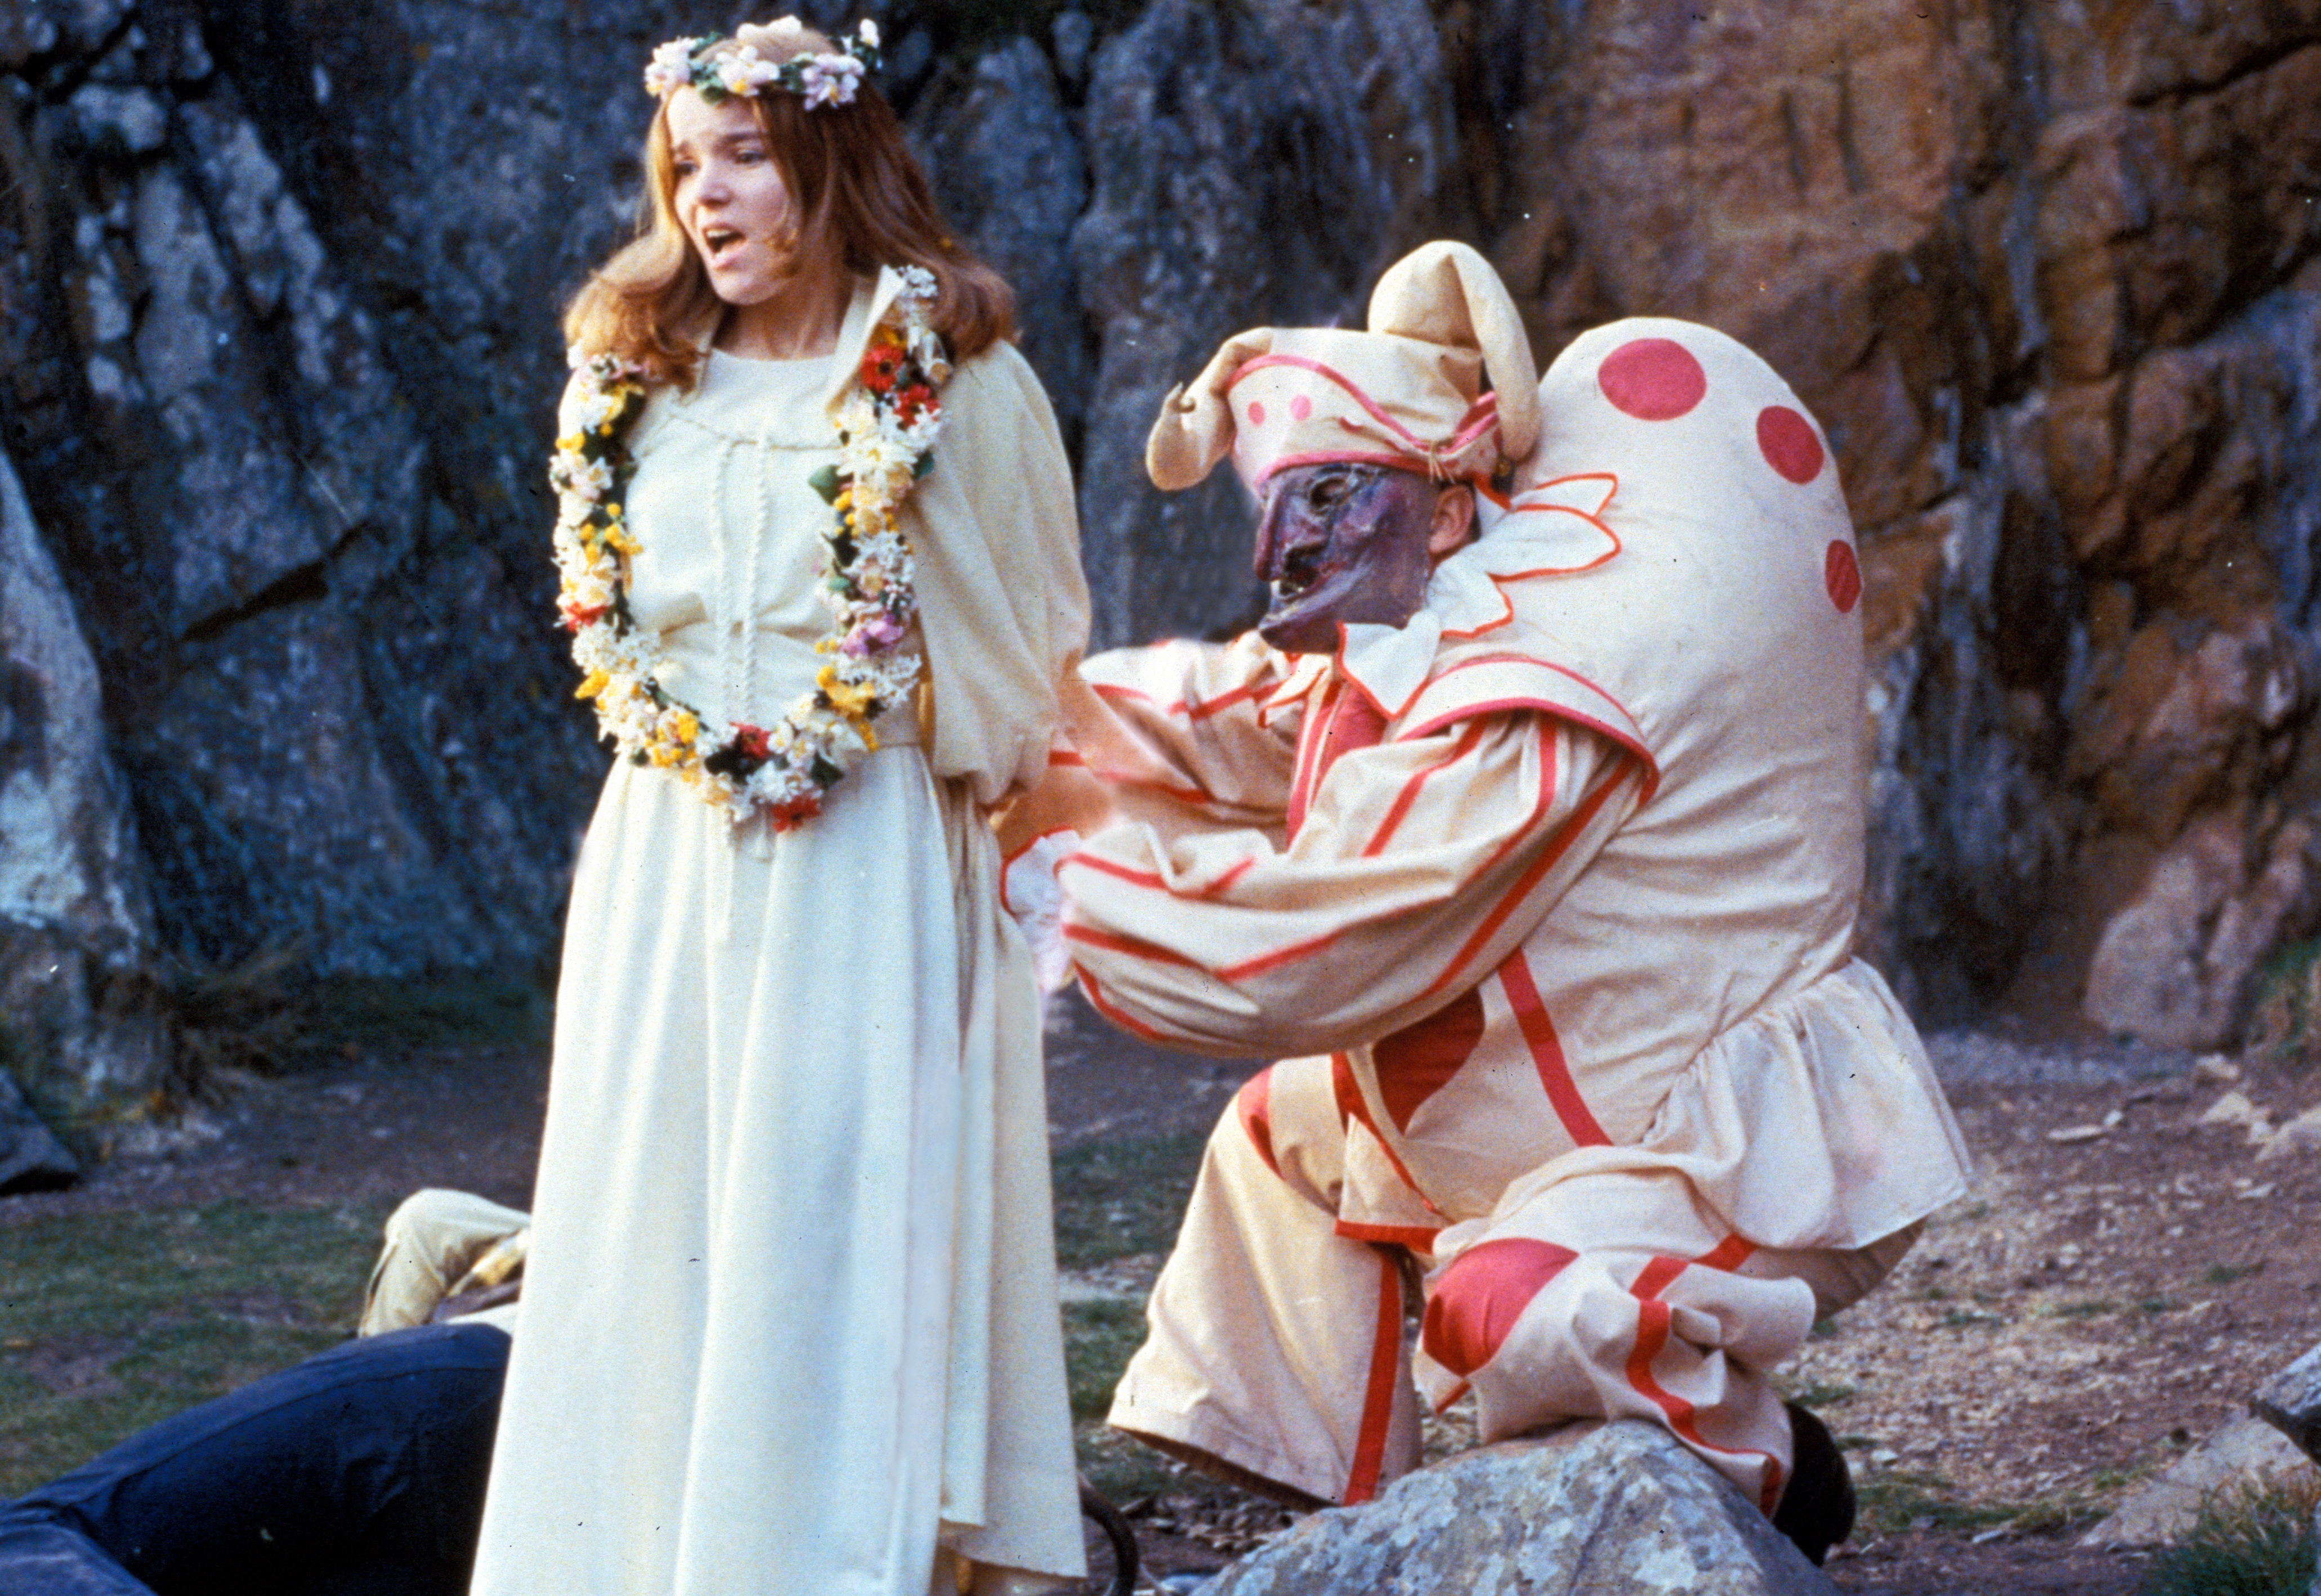 Get Your Reps In: “The Wicker Man” May Be Cinema's Most Iconic Pagan Horror  Film